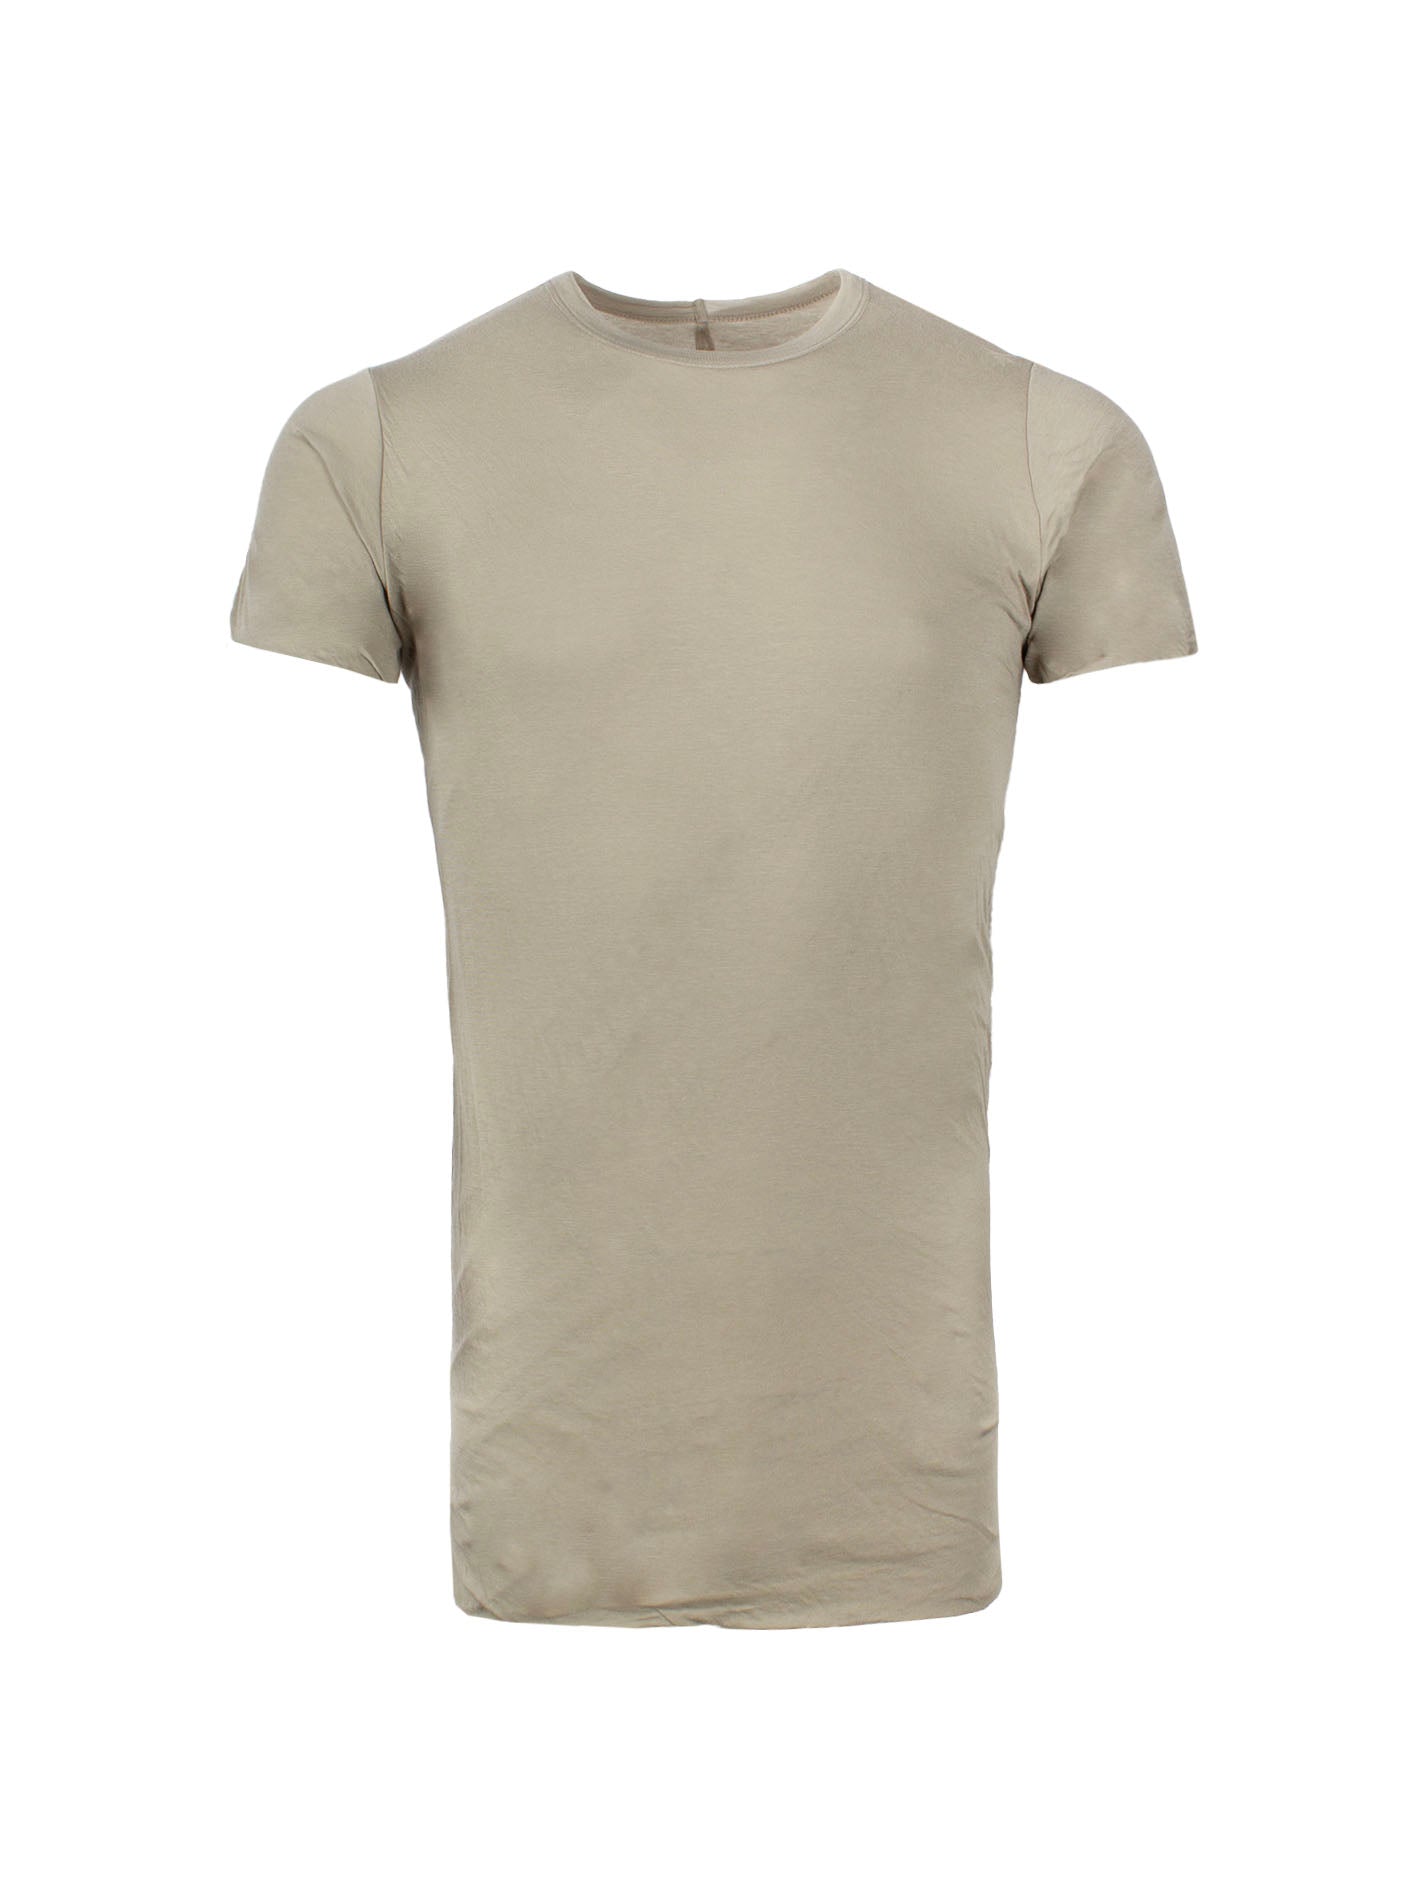 RICK OWENS CRINKLED COTTON T-SHIRT